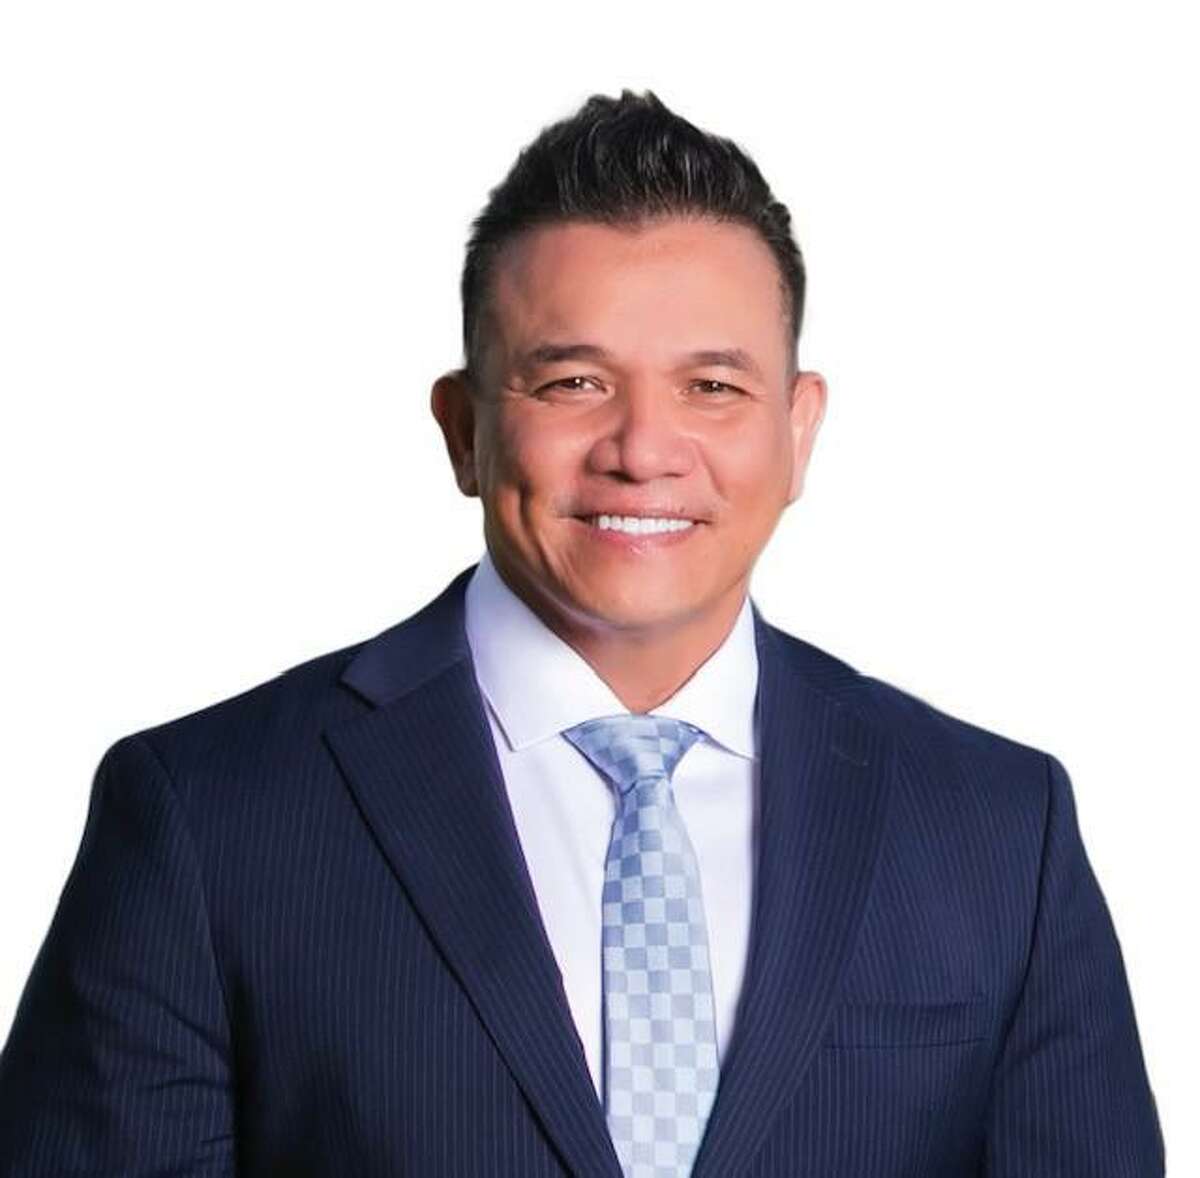 Willie Vasquez Ng is a former San Antonio police officer running on his public service background in the Republican primary for a South Texas district long held by U.S. Rep. Henry Cuellar.